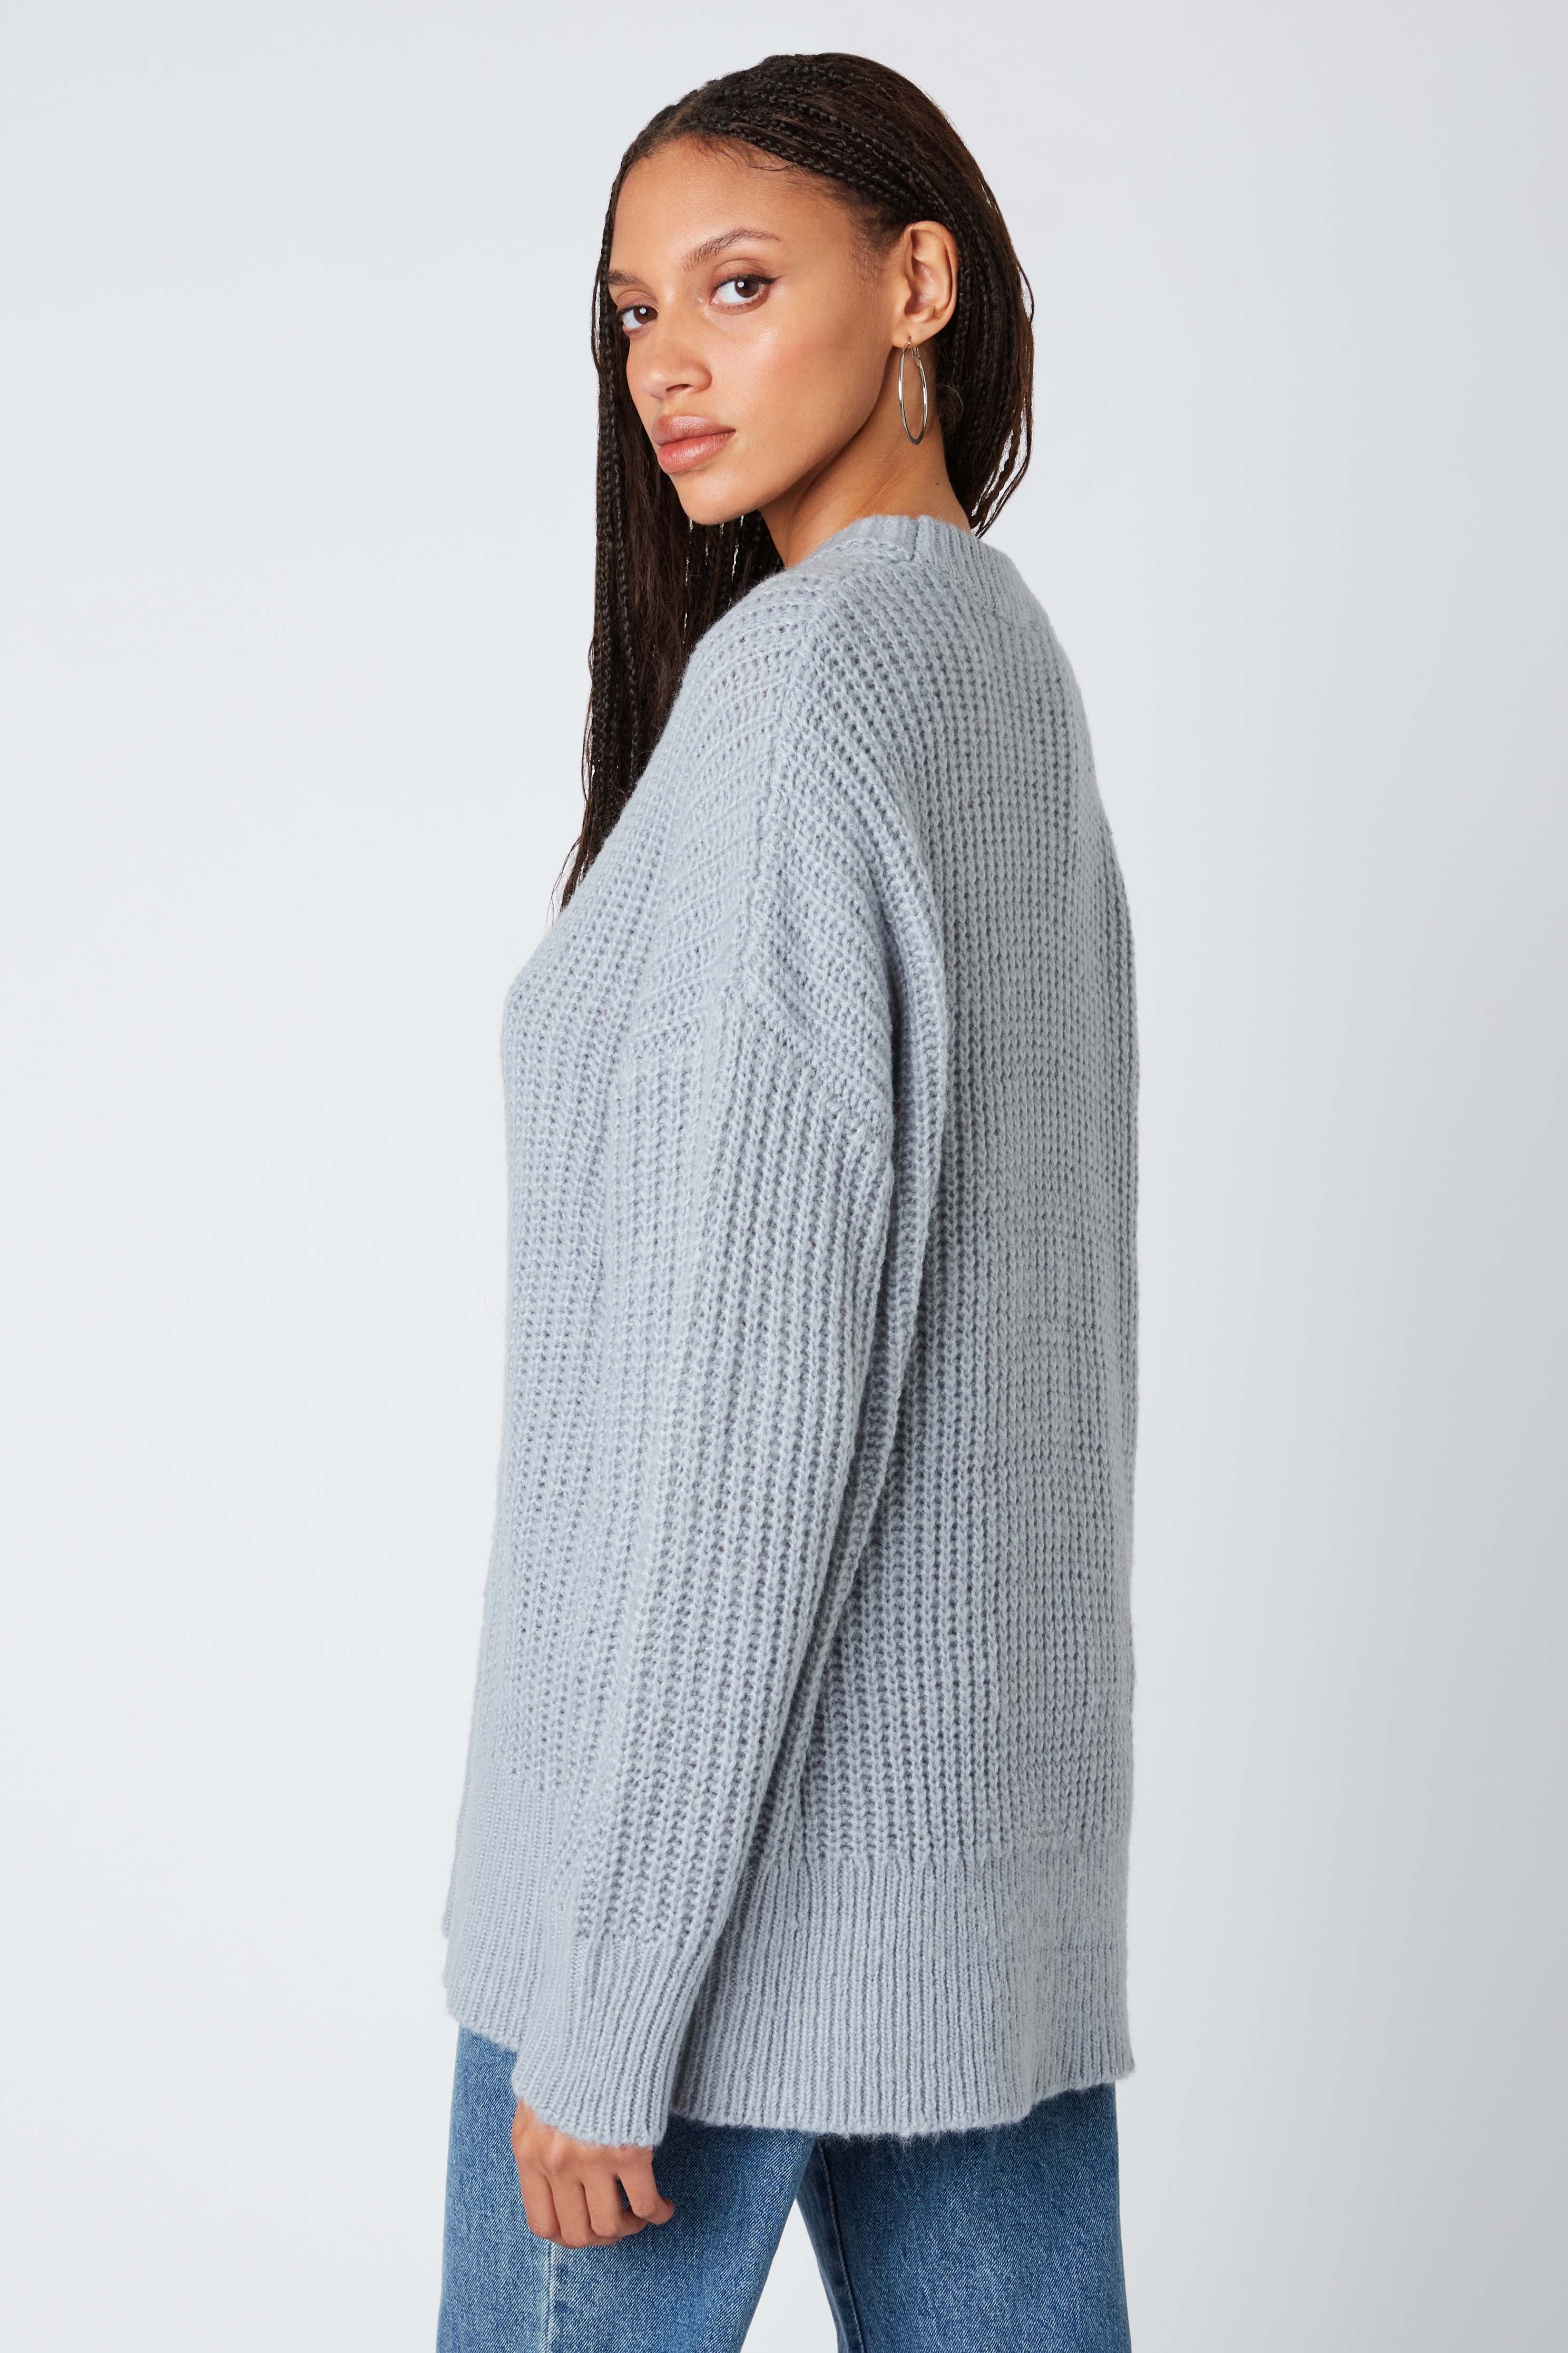 Oversized Knitted Sweater in Slate Back View